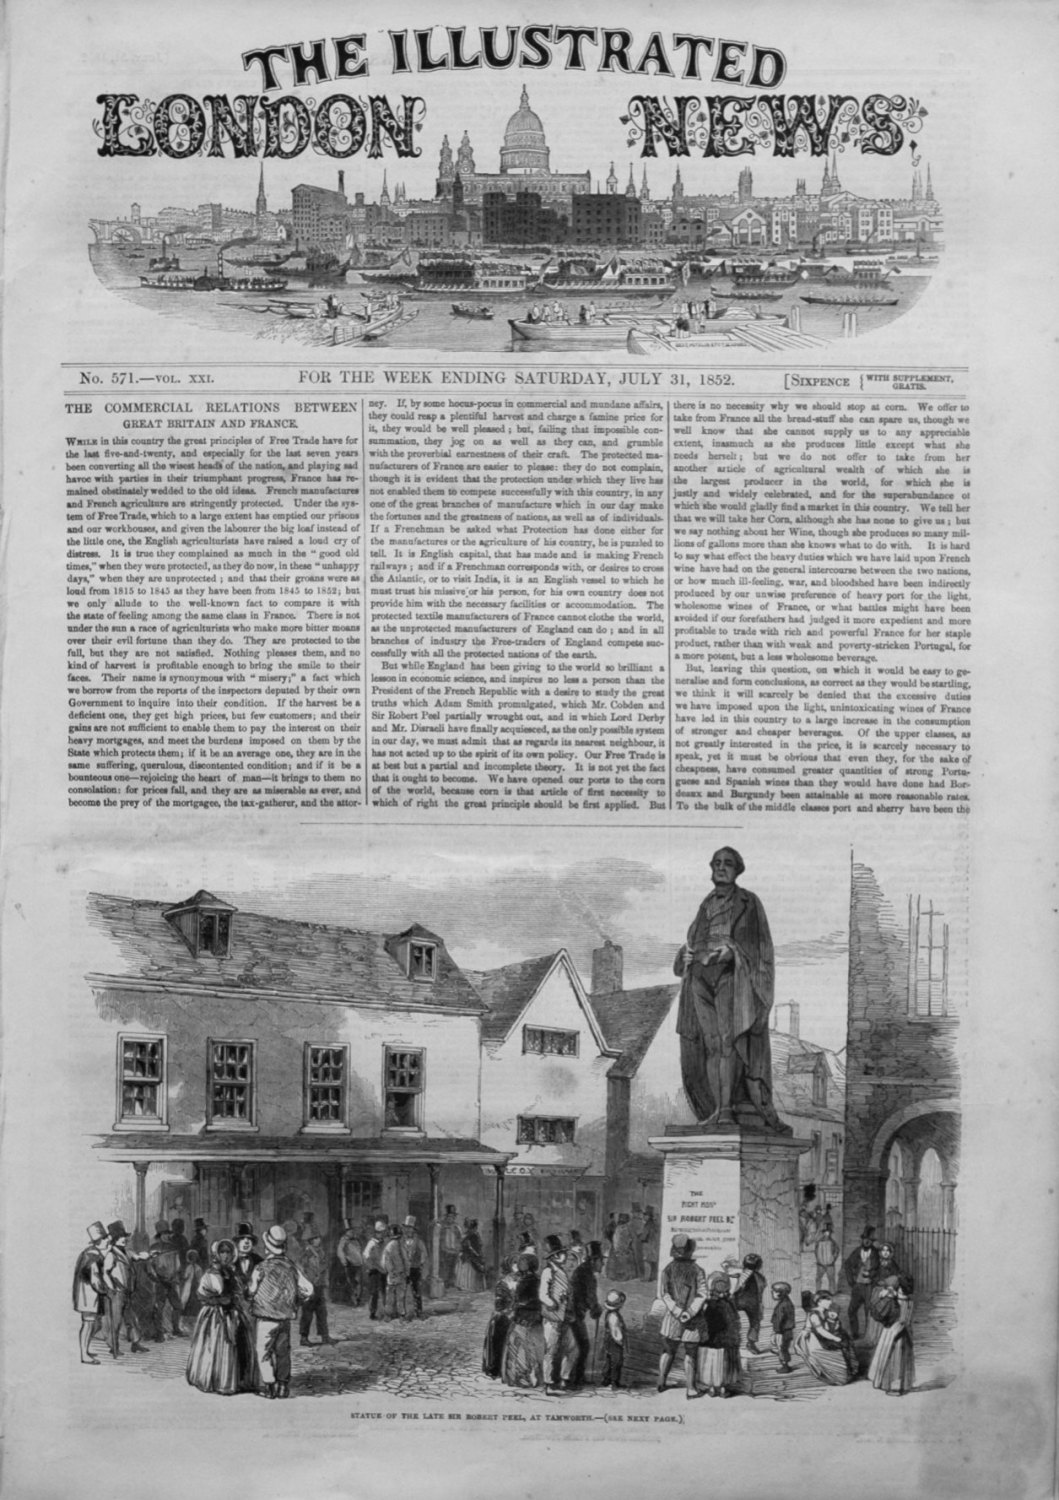 Illustrated London News July 31st 1852.